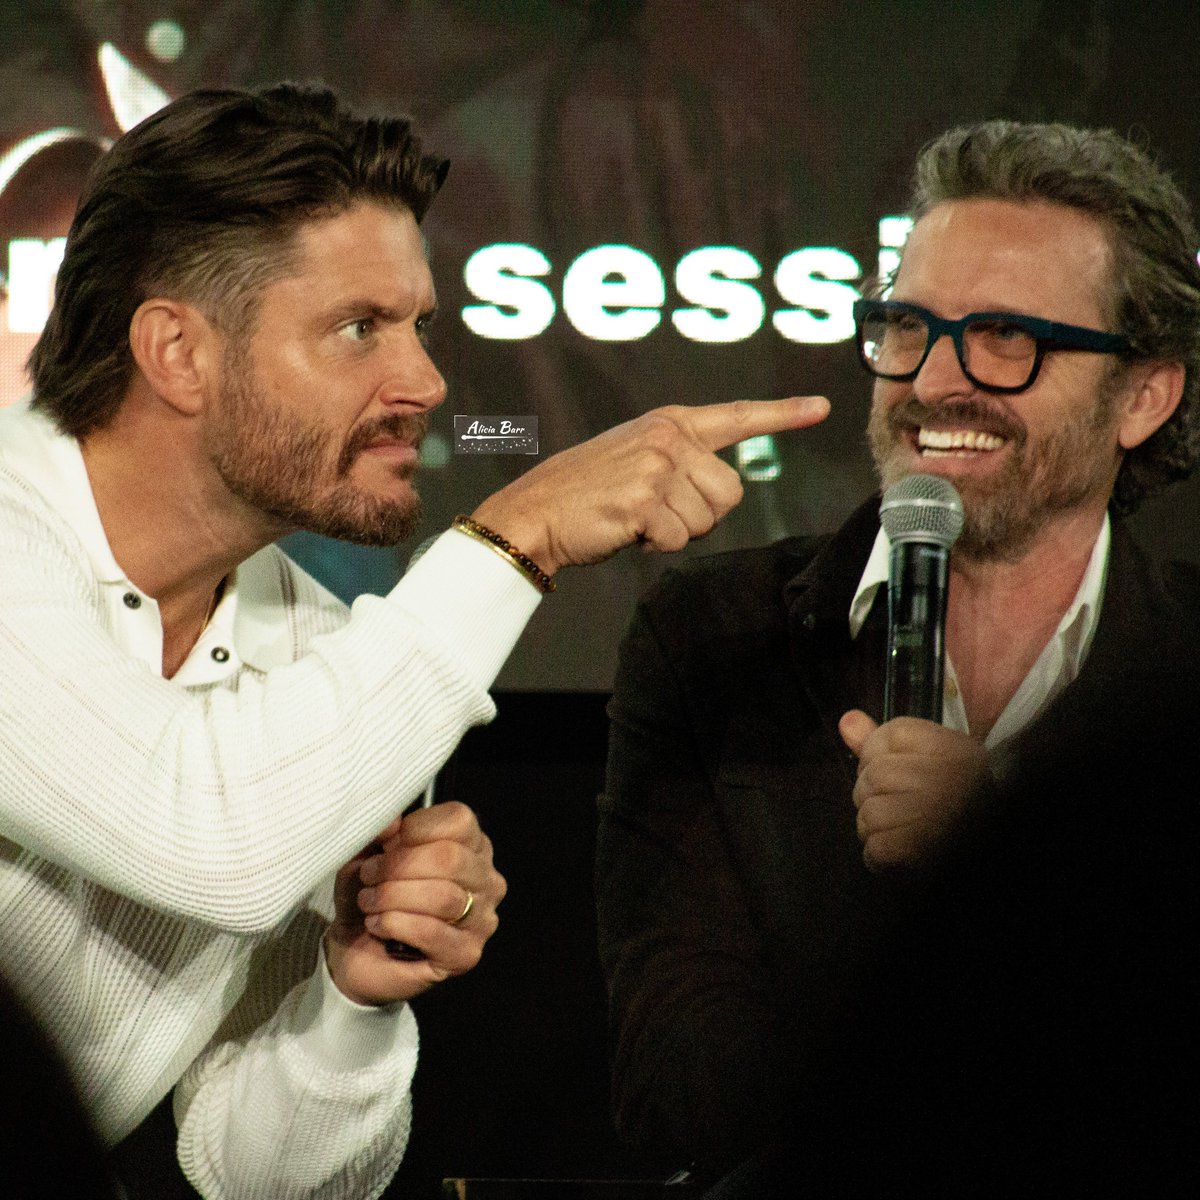 Some more adorable Robsen from JIB #JIB14